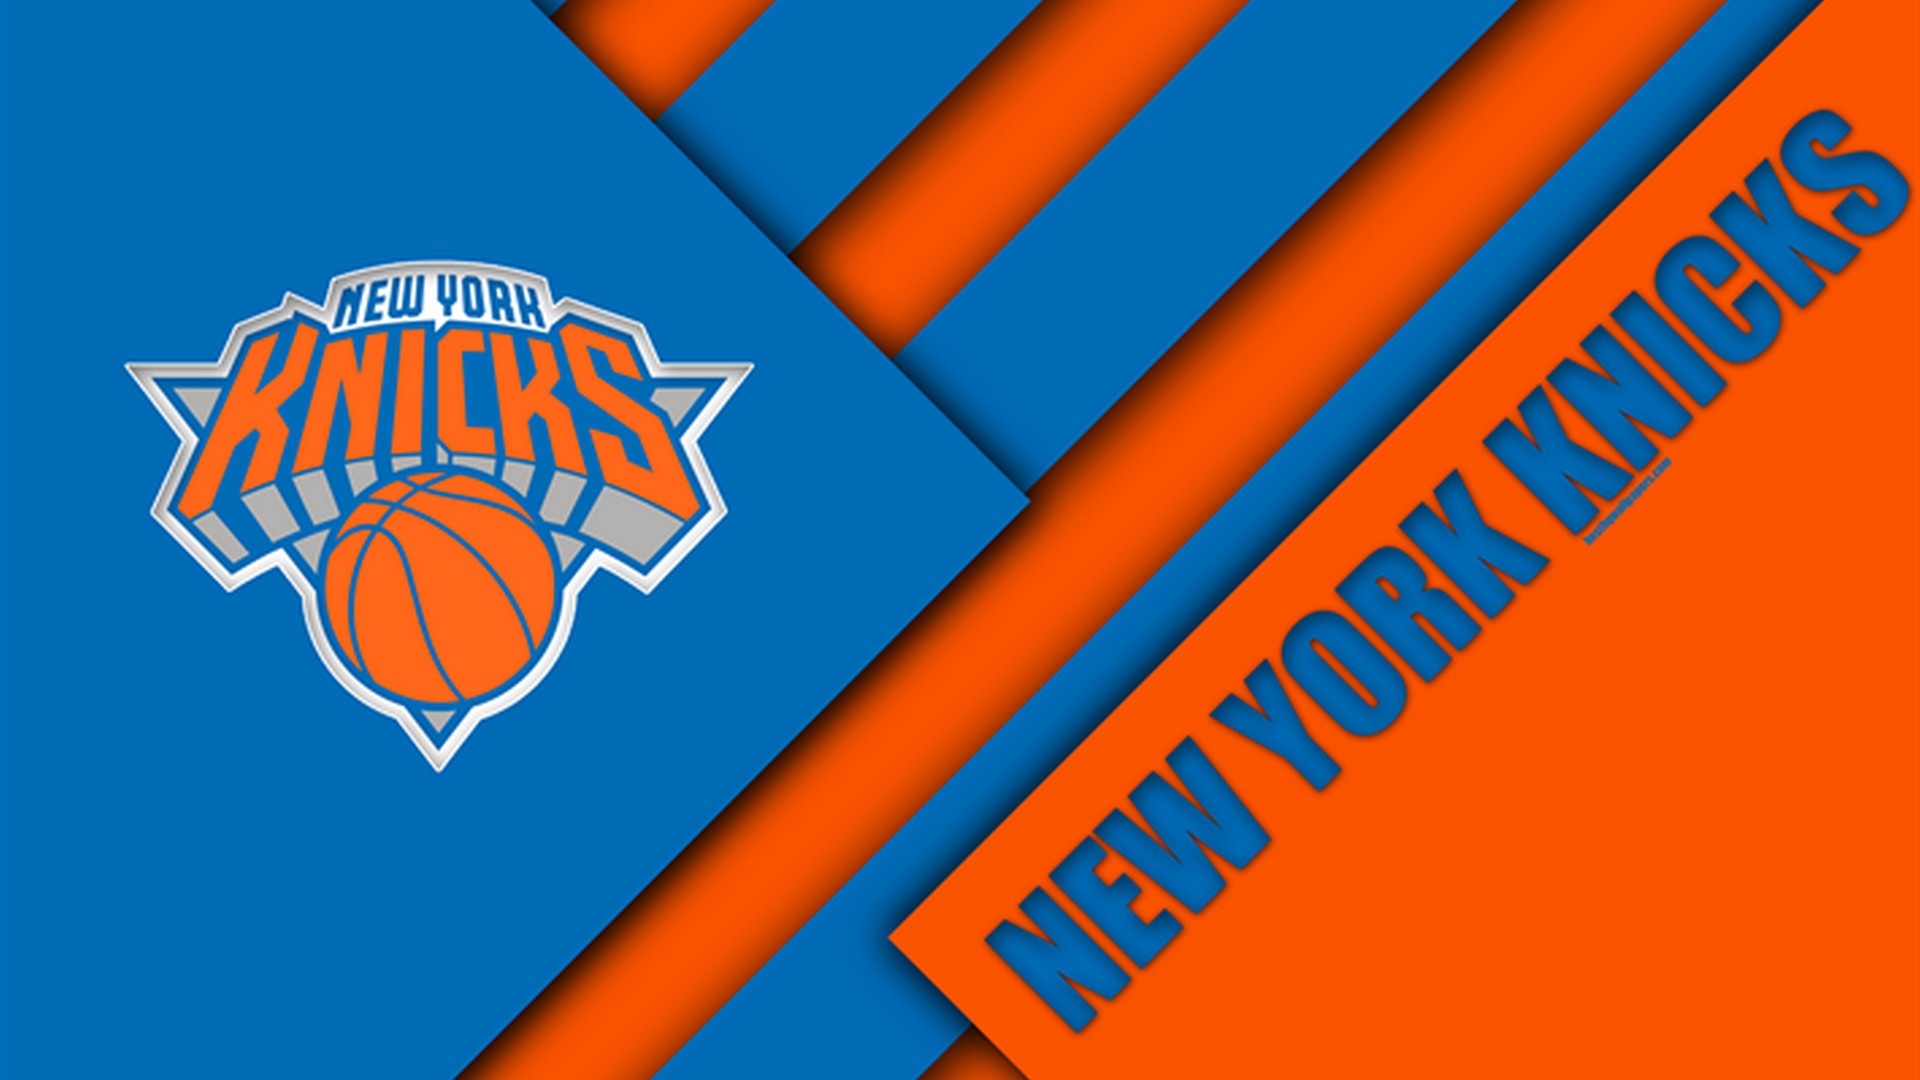 New York Knicks Desktop Wallpaper with image dimensions 1920x1080 pixel. You can make this wallpaper for your Desktop Computer Backgrounds, Windows or Mac Screensavers, iPhone Lock screen, Tablet or Android and another Mobile Phone device